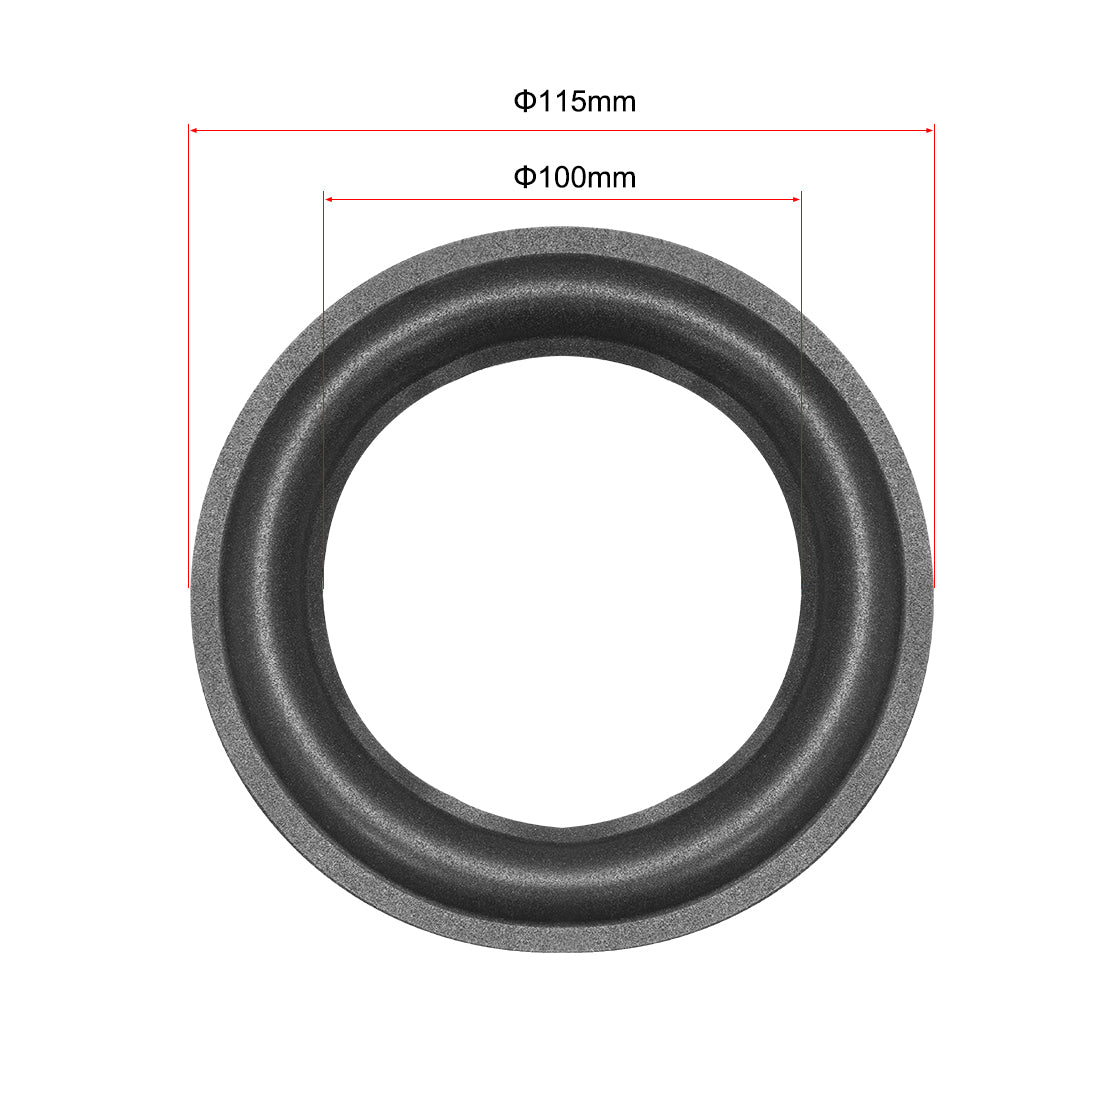 uxcell Uxcell 6.5 inch Speaker Foam Edge Surround Rings Replacement Part for Speaker Repair or DIY